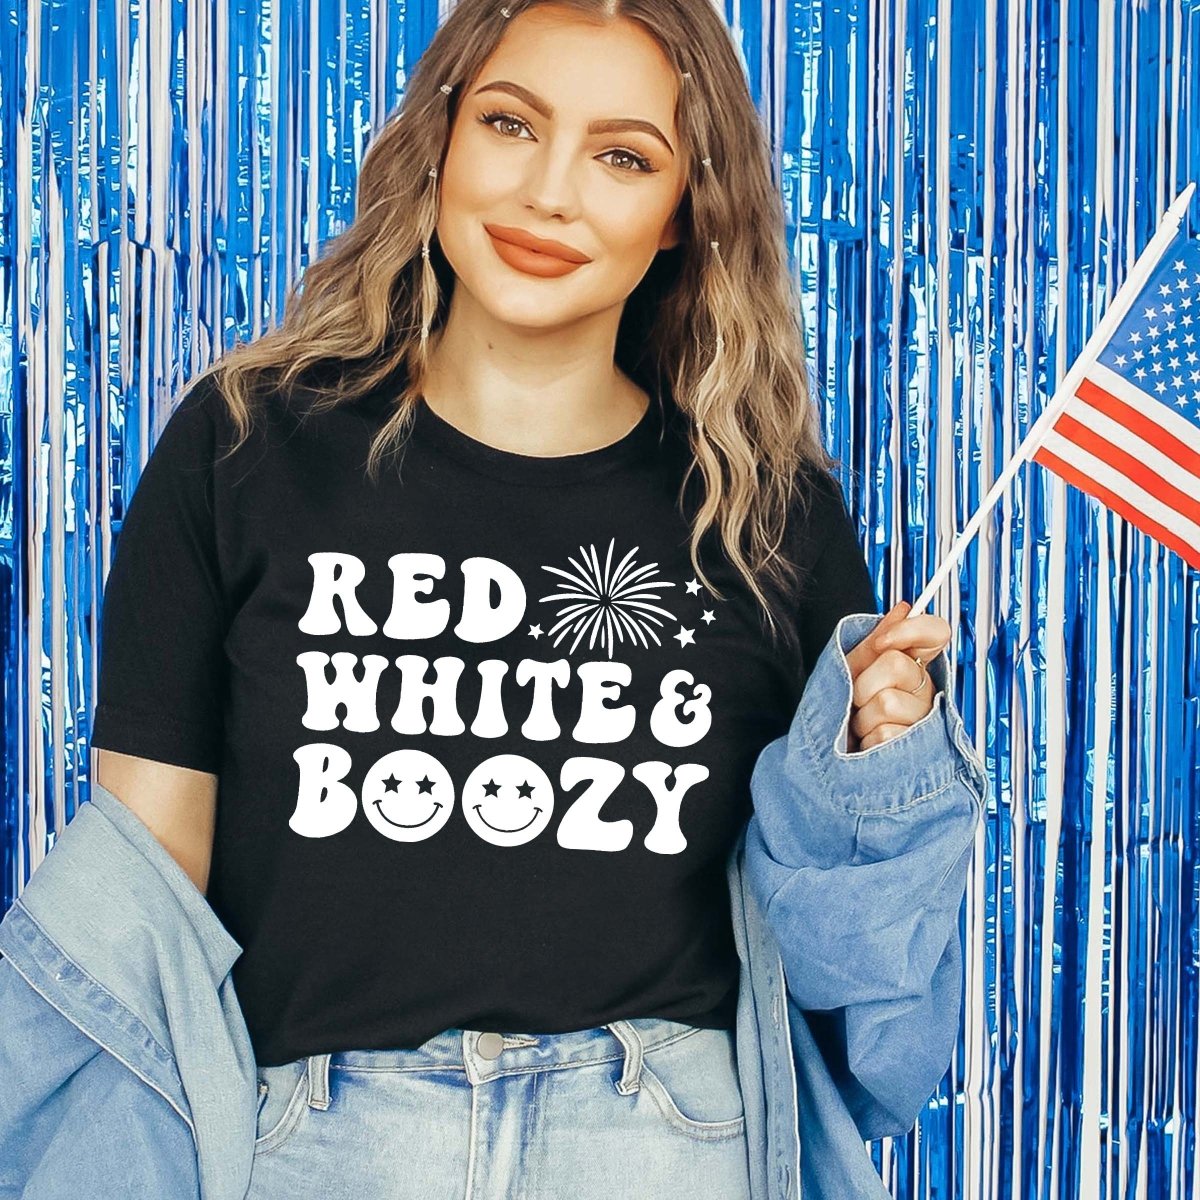 Red white and Boozy Wholesale tee - Limeberry Designs